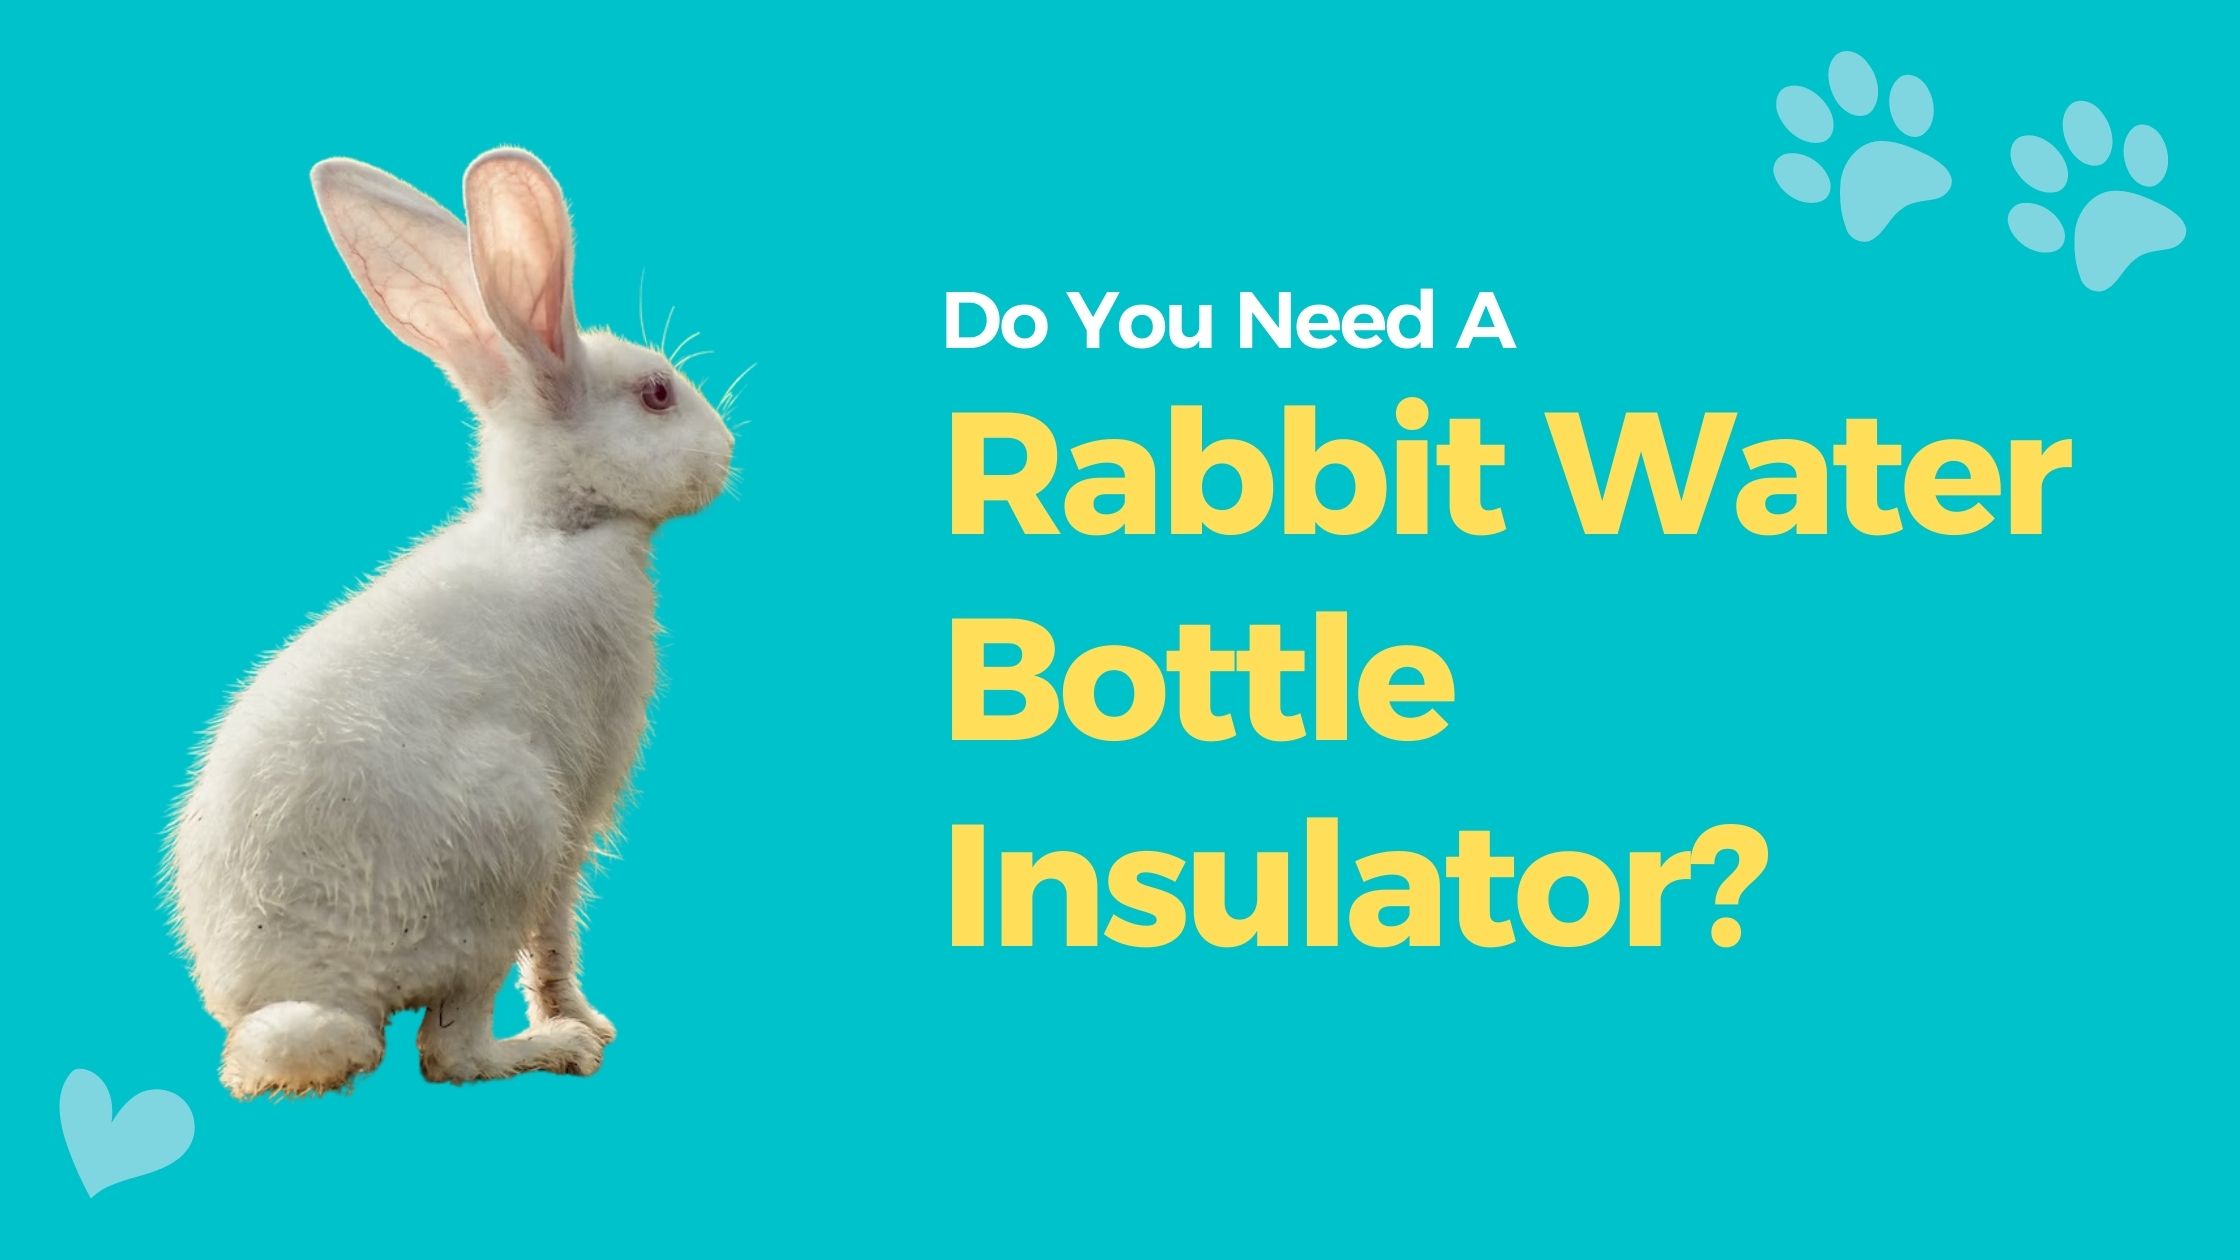 Do You Need A Rabbit Water Bottle Insulator?